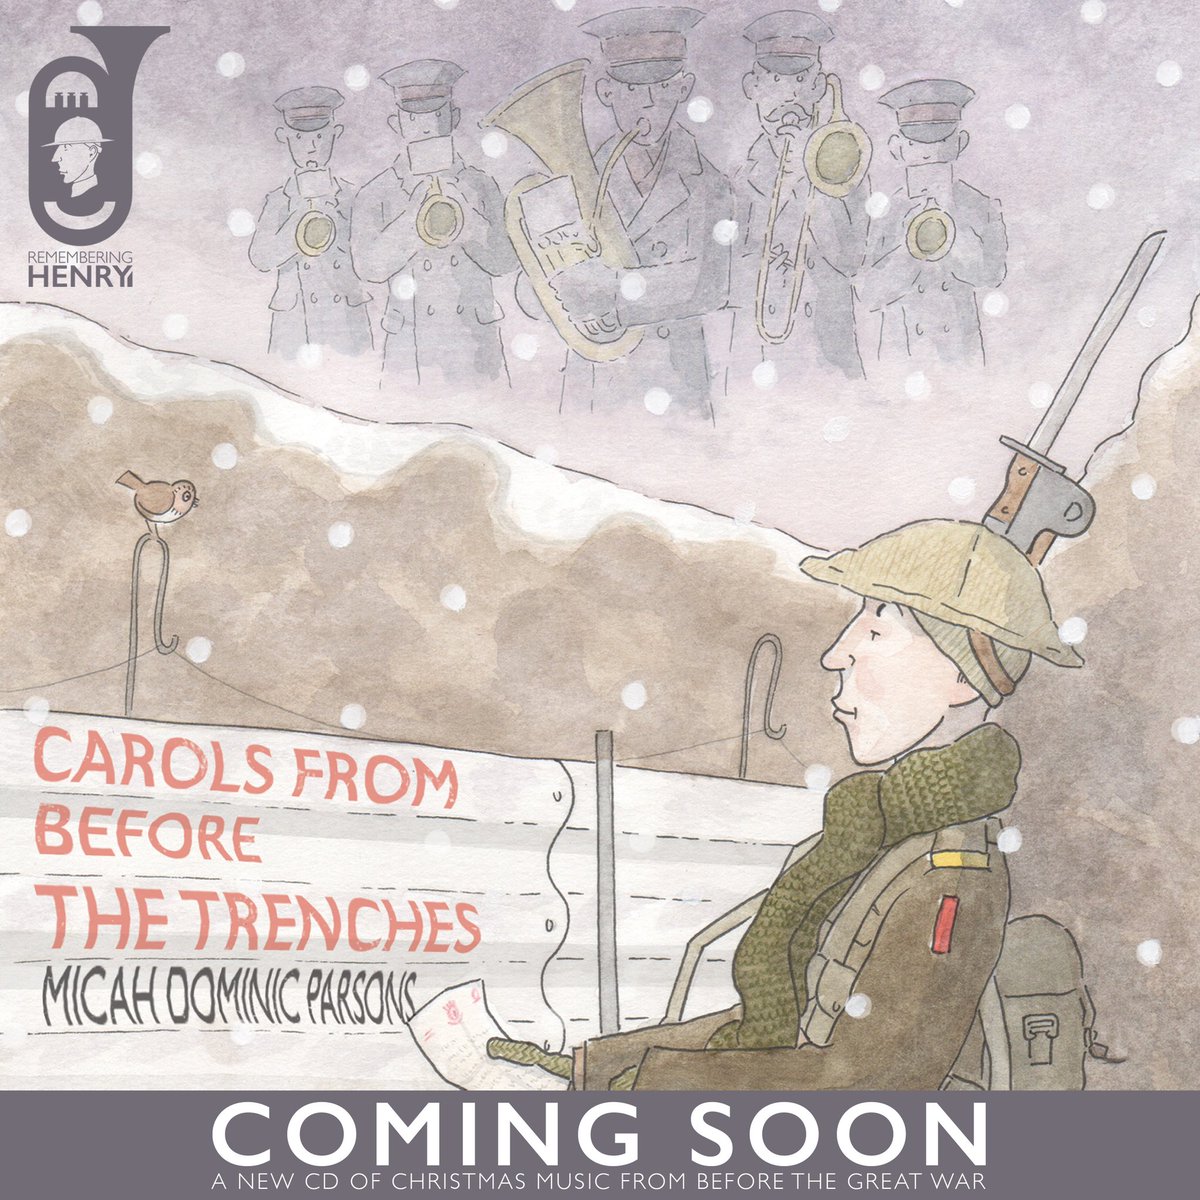 I am really excited to officially reveal and announce my brand new CD, which is entitled, ‘Carols From Before The Trenches’, which is the very first CD that I have ever planned, recorded and brought to life. #CarolsFromBeforeTheTrenches